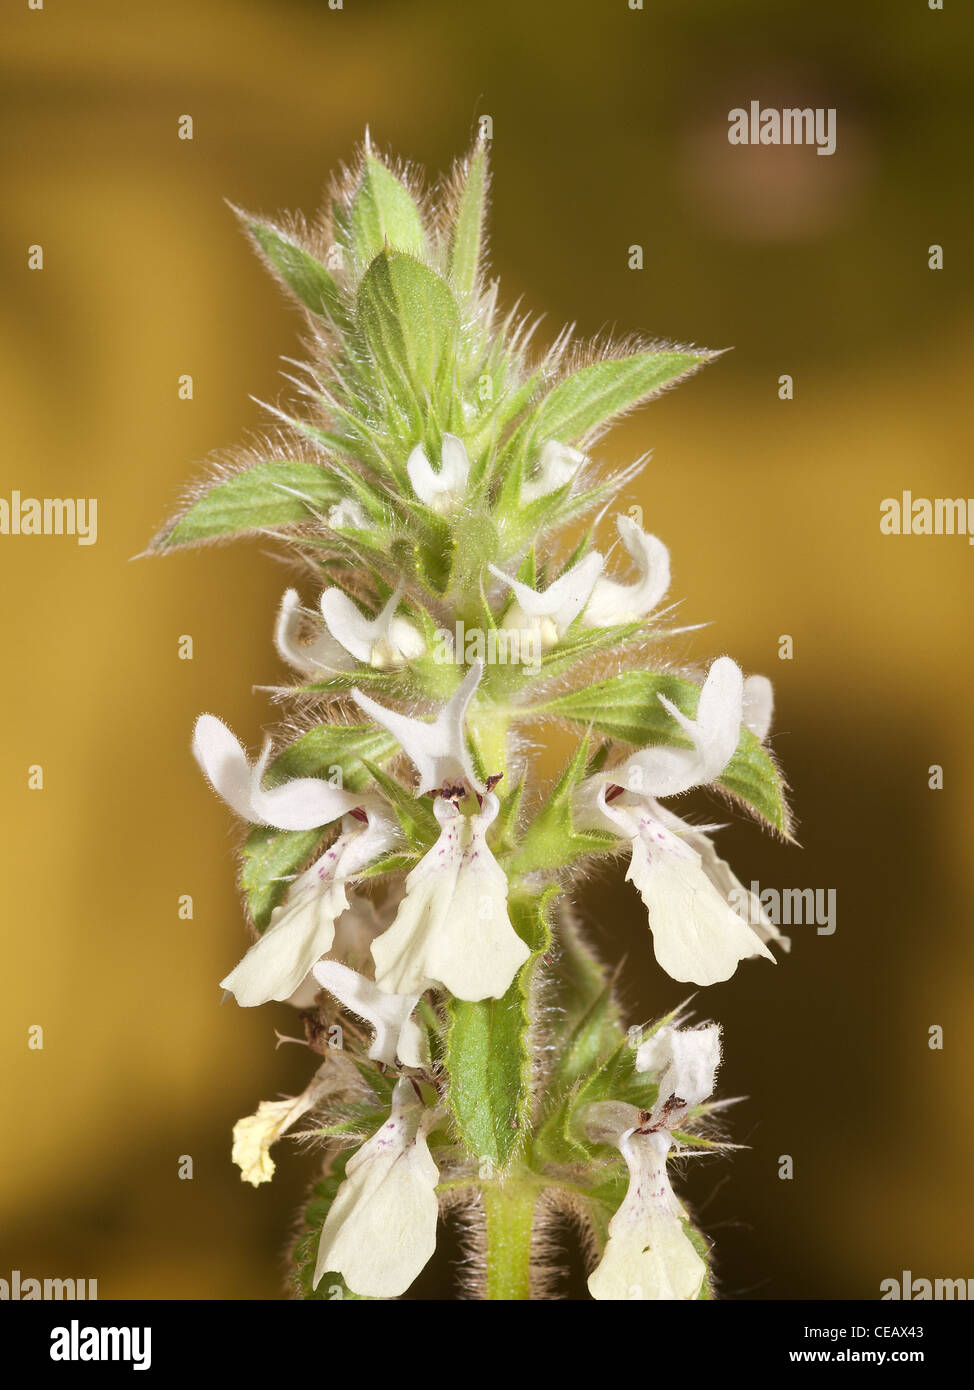 White dead nettle, Sideritis hirsuta, portrait of flowers with nice out focus background. Stock Photo